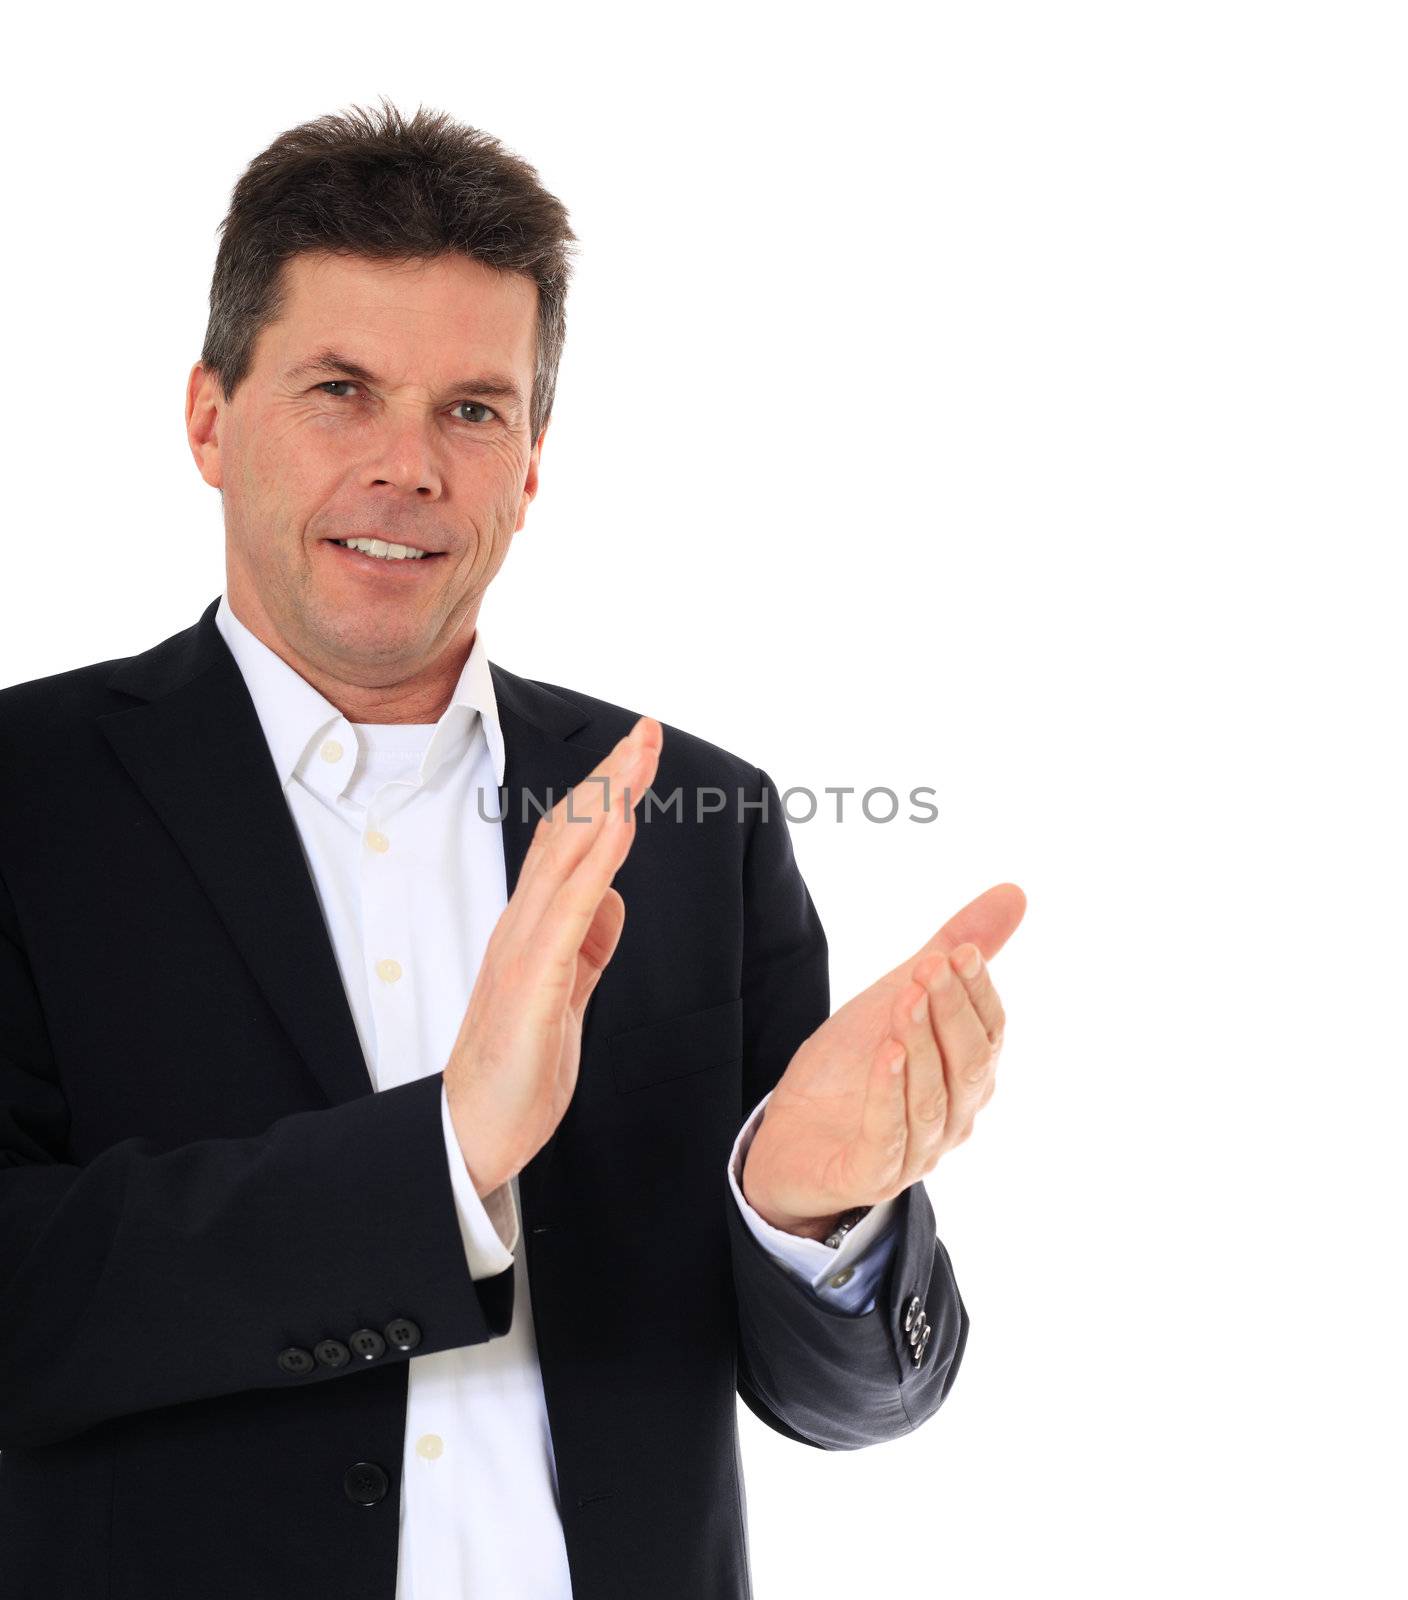 Attractive middle-aged man applauding. All on white background.